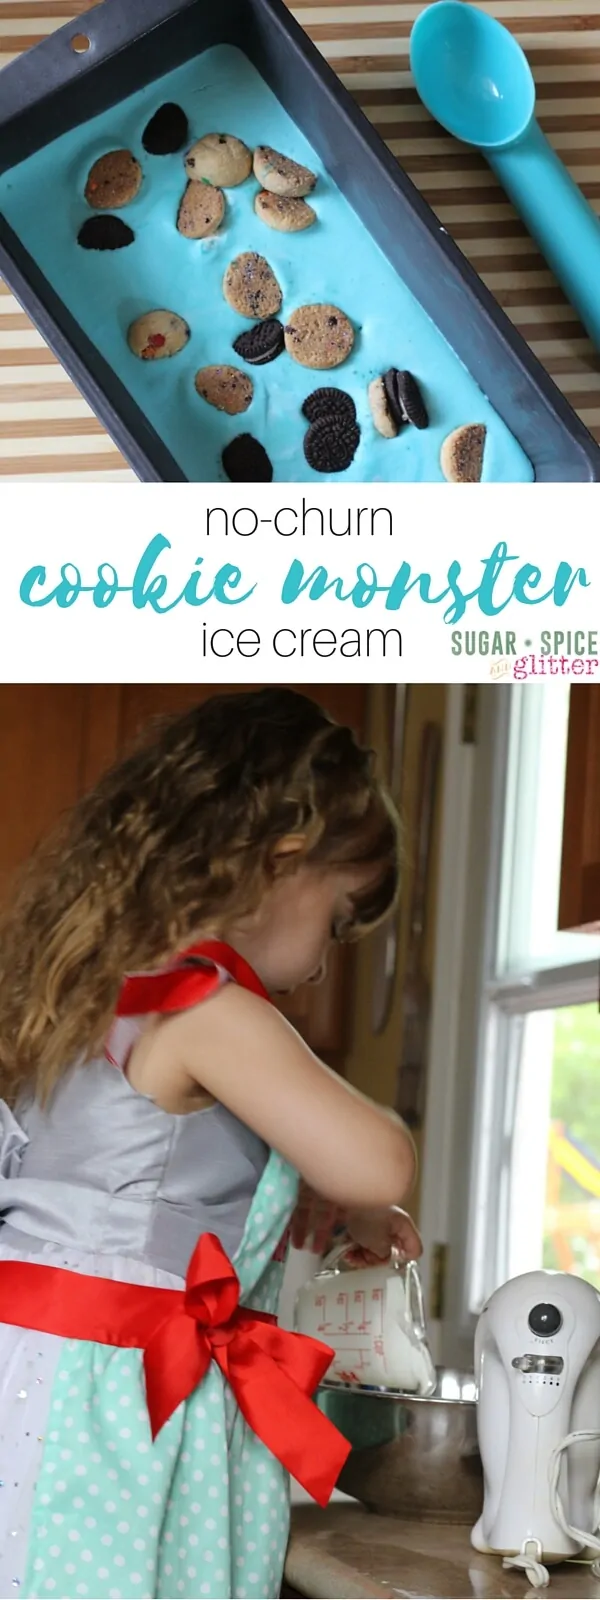 No-churn Cookie Monster Ice Cream, made by kids in the kitchen! Using natural food dyes, this cookie monster ice cream is a fun summer dessert for kids!